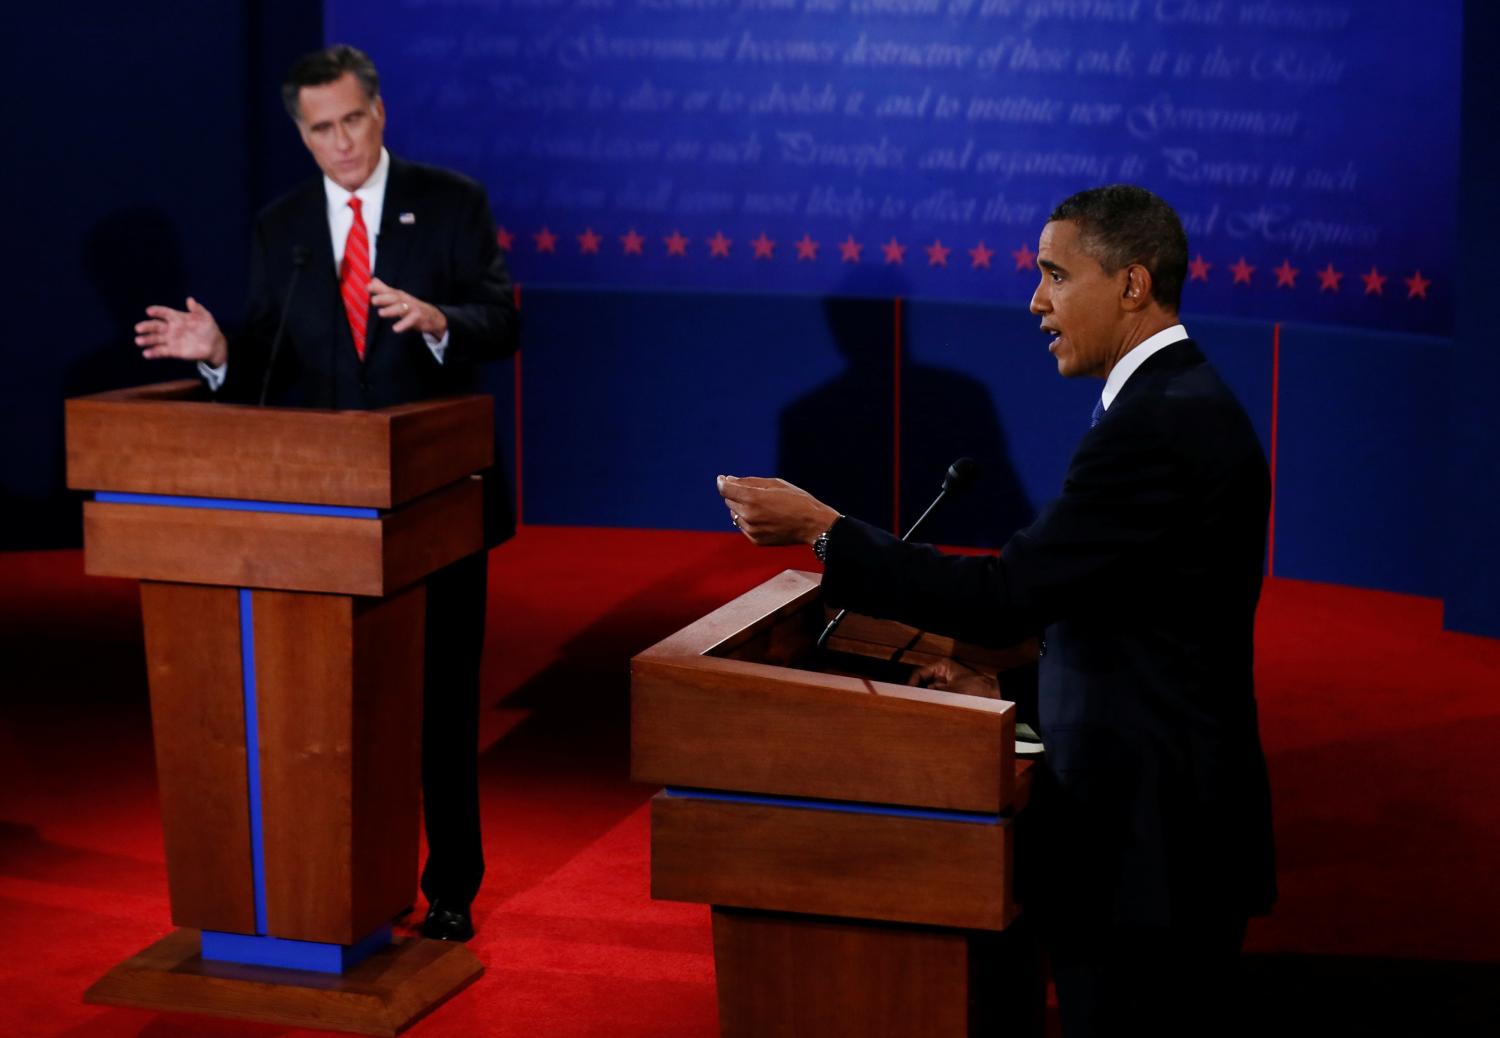 President Barack Obama answers a question as Republican presidential nominee Mitt Romney listens during the first 2012 U.S. presidential debate in Denver